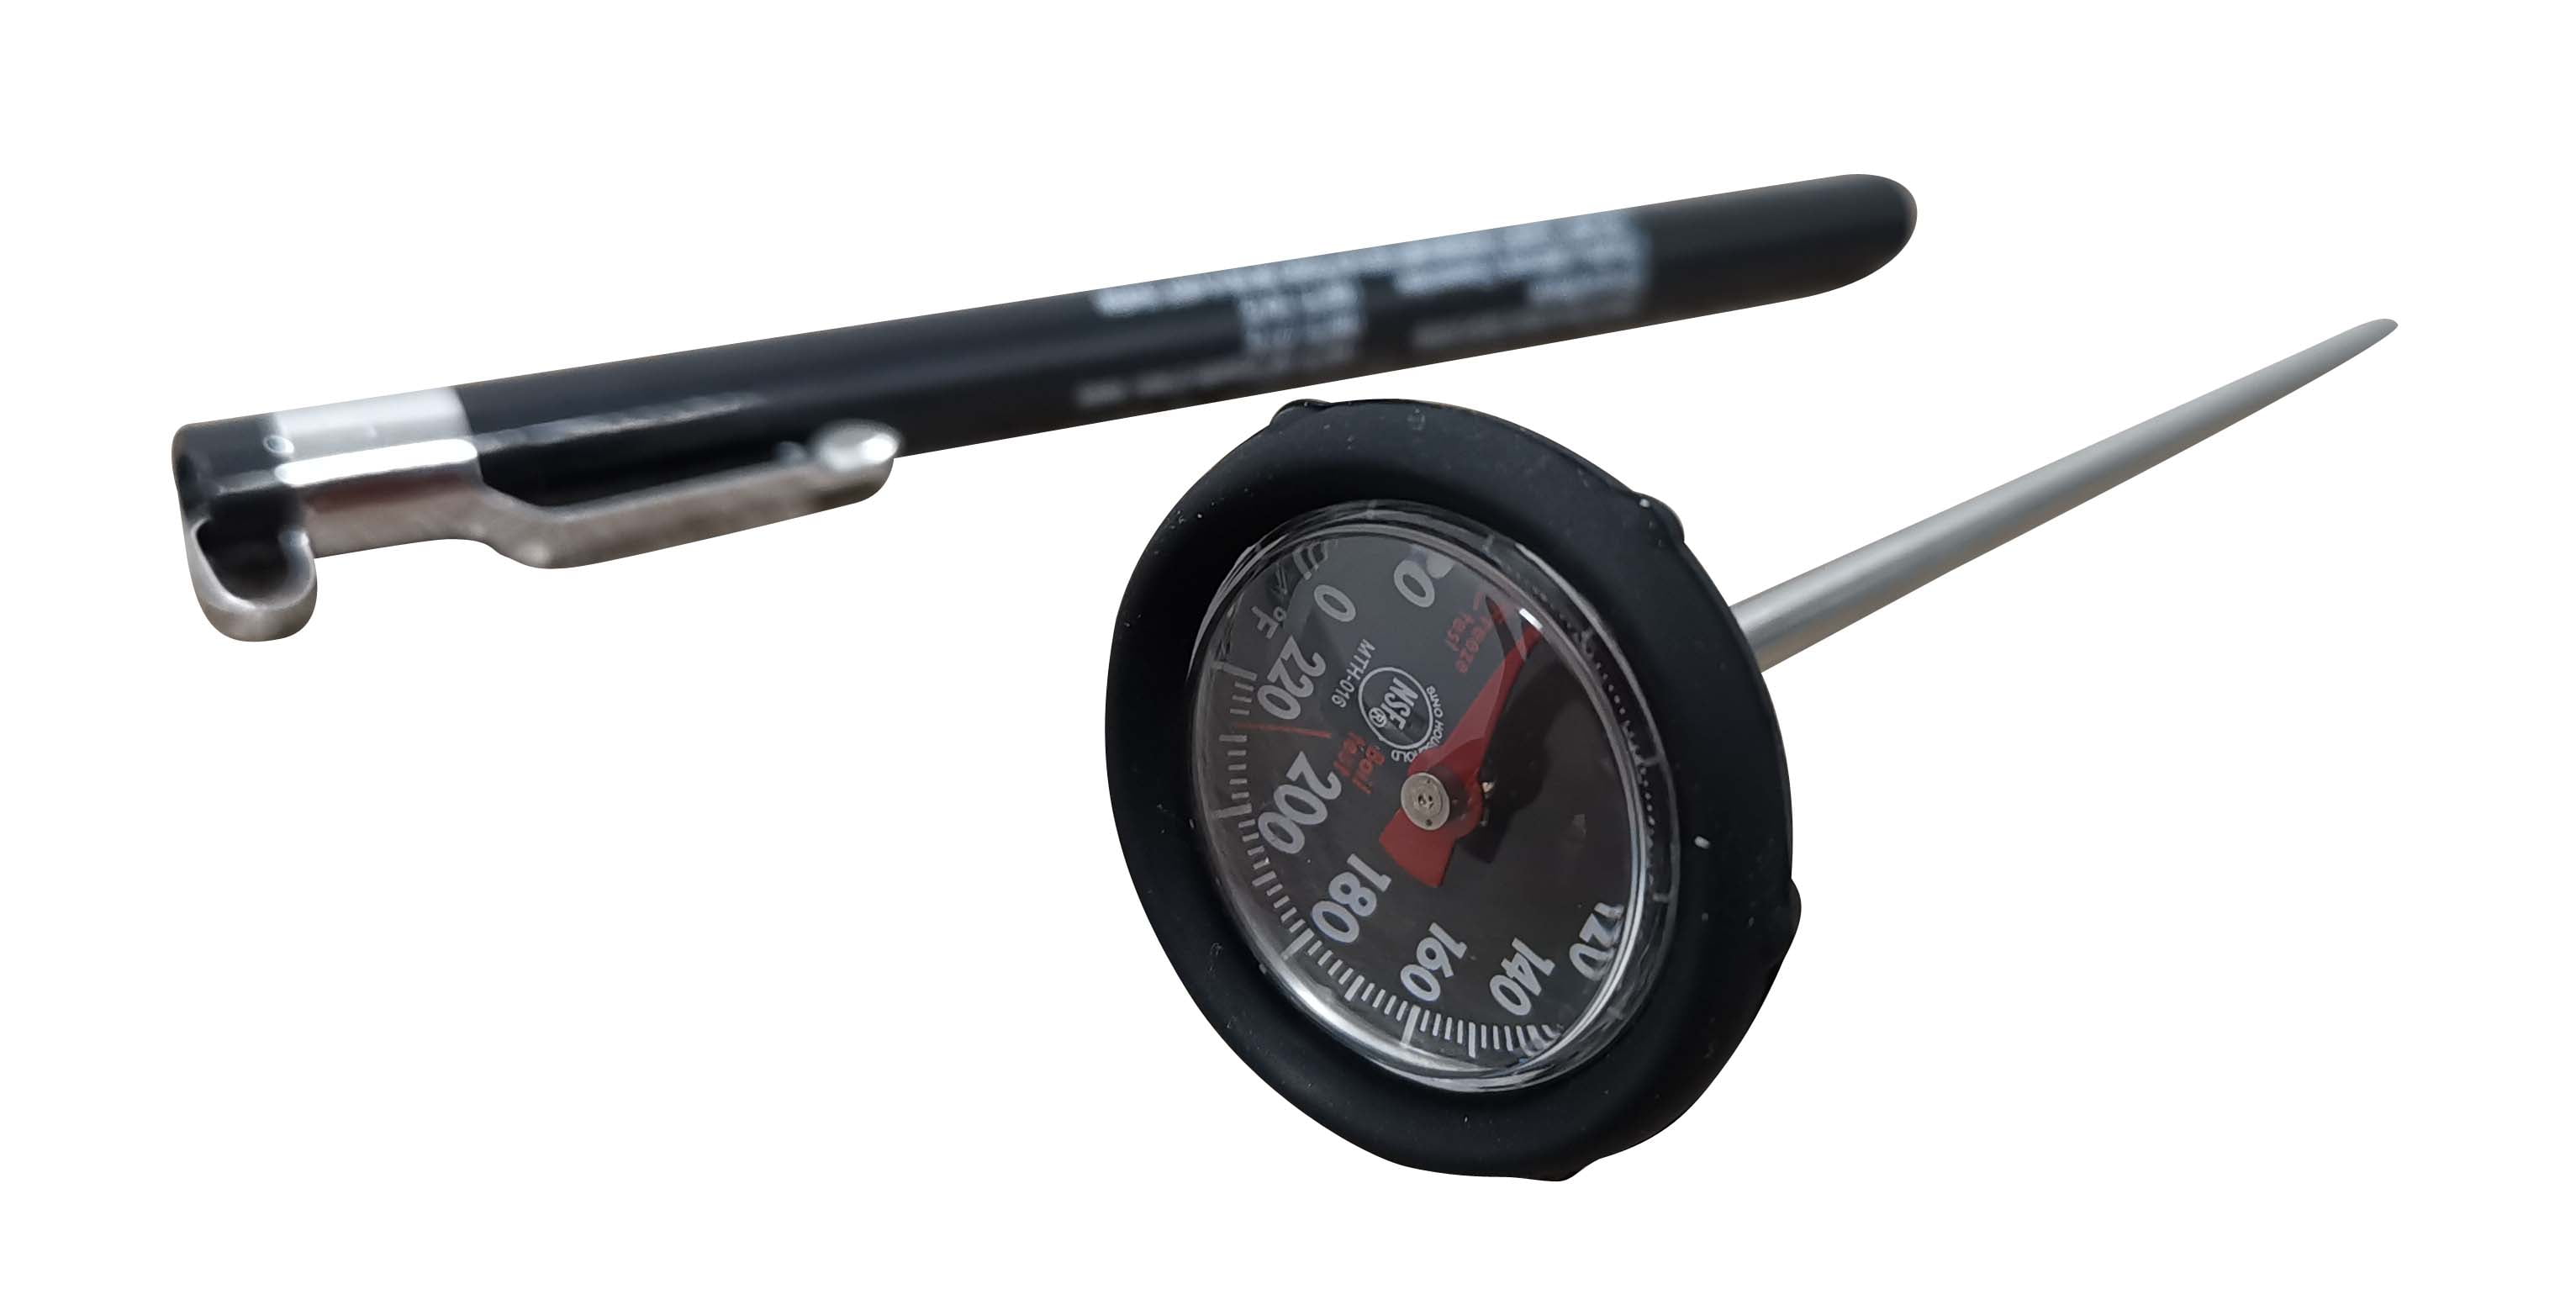 Mainstays Candy Thermometer, Clip Attachment with Easy to Read Red and  Black Numbers bold display